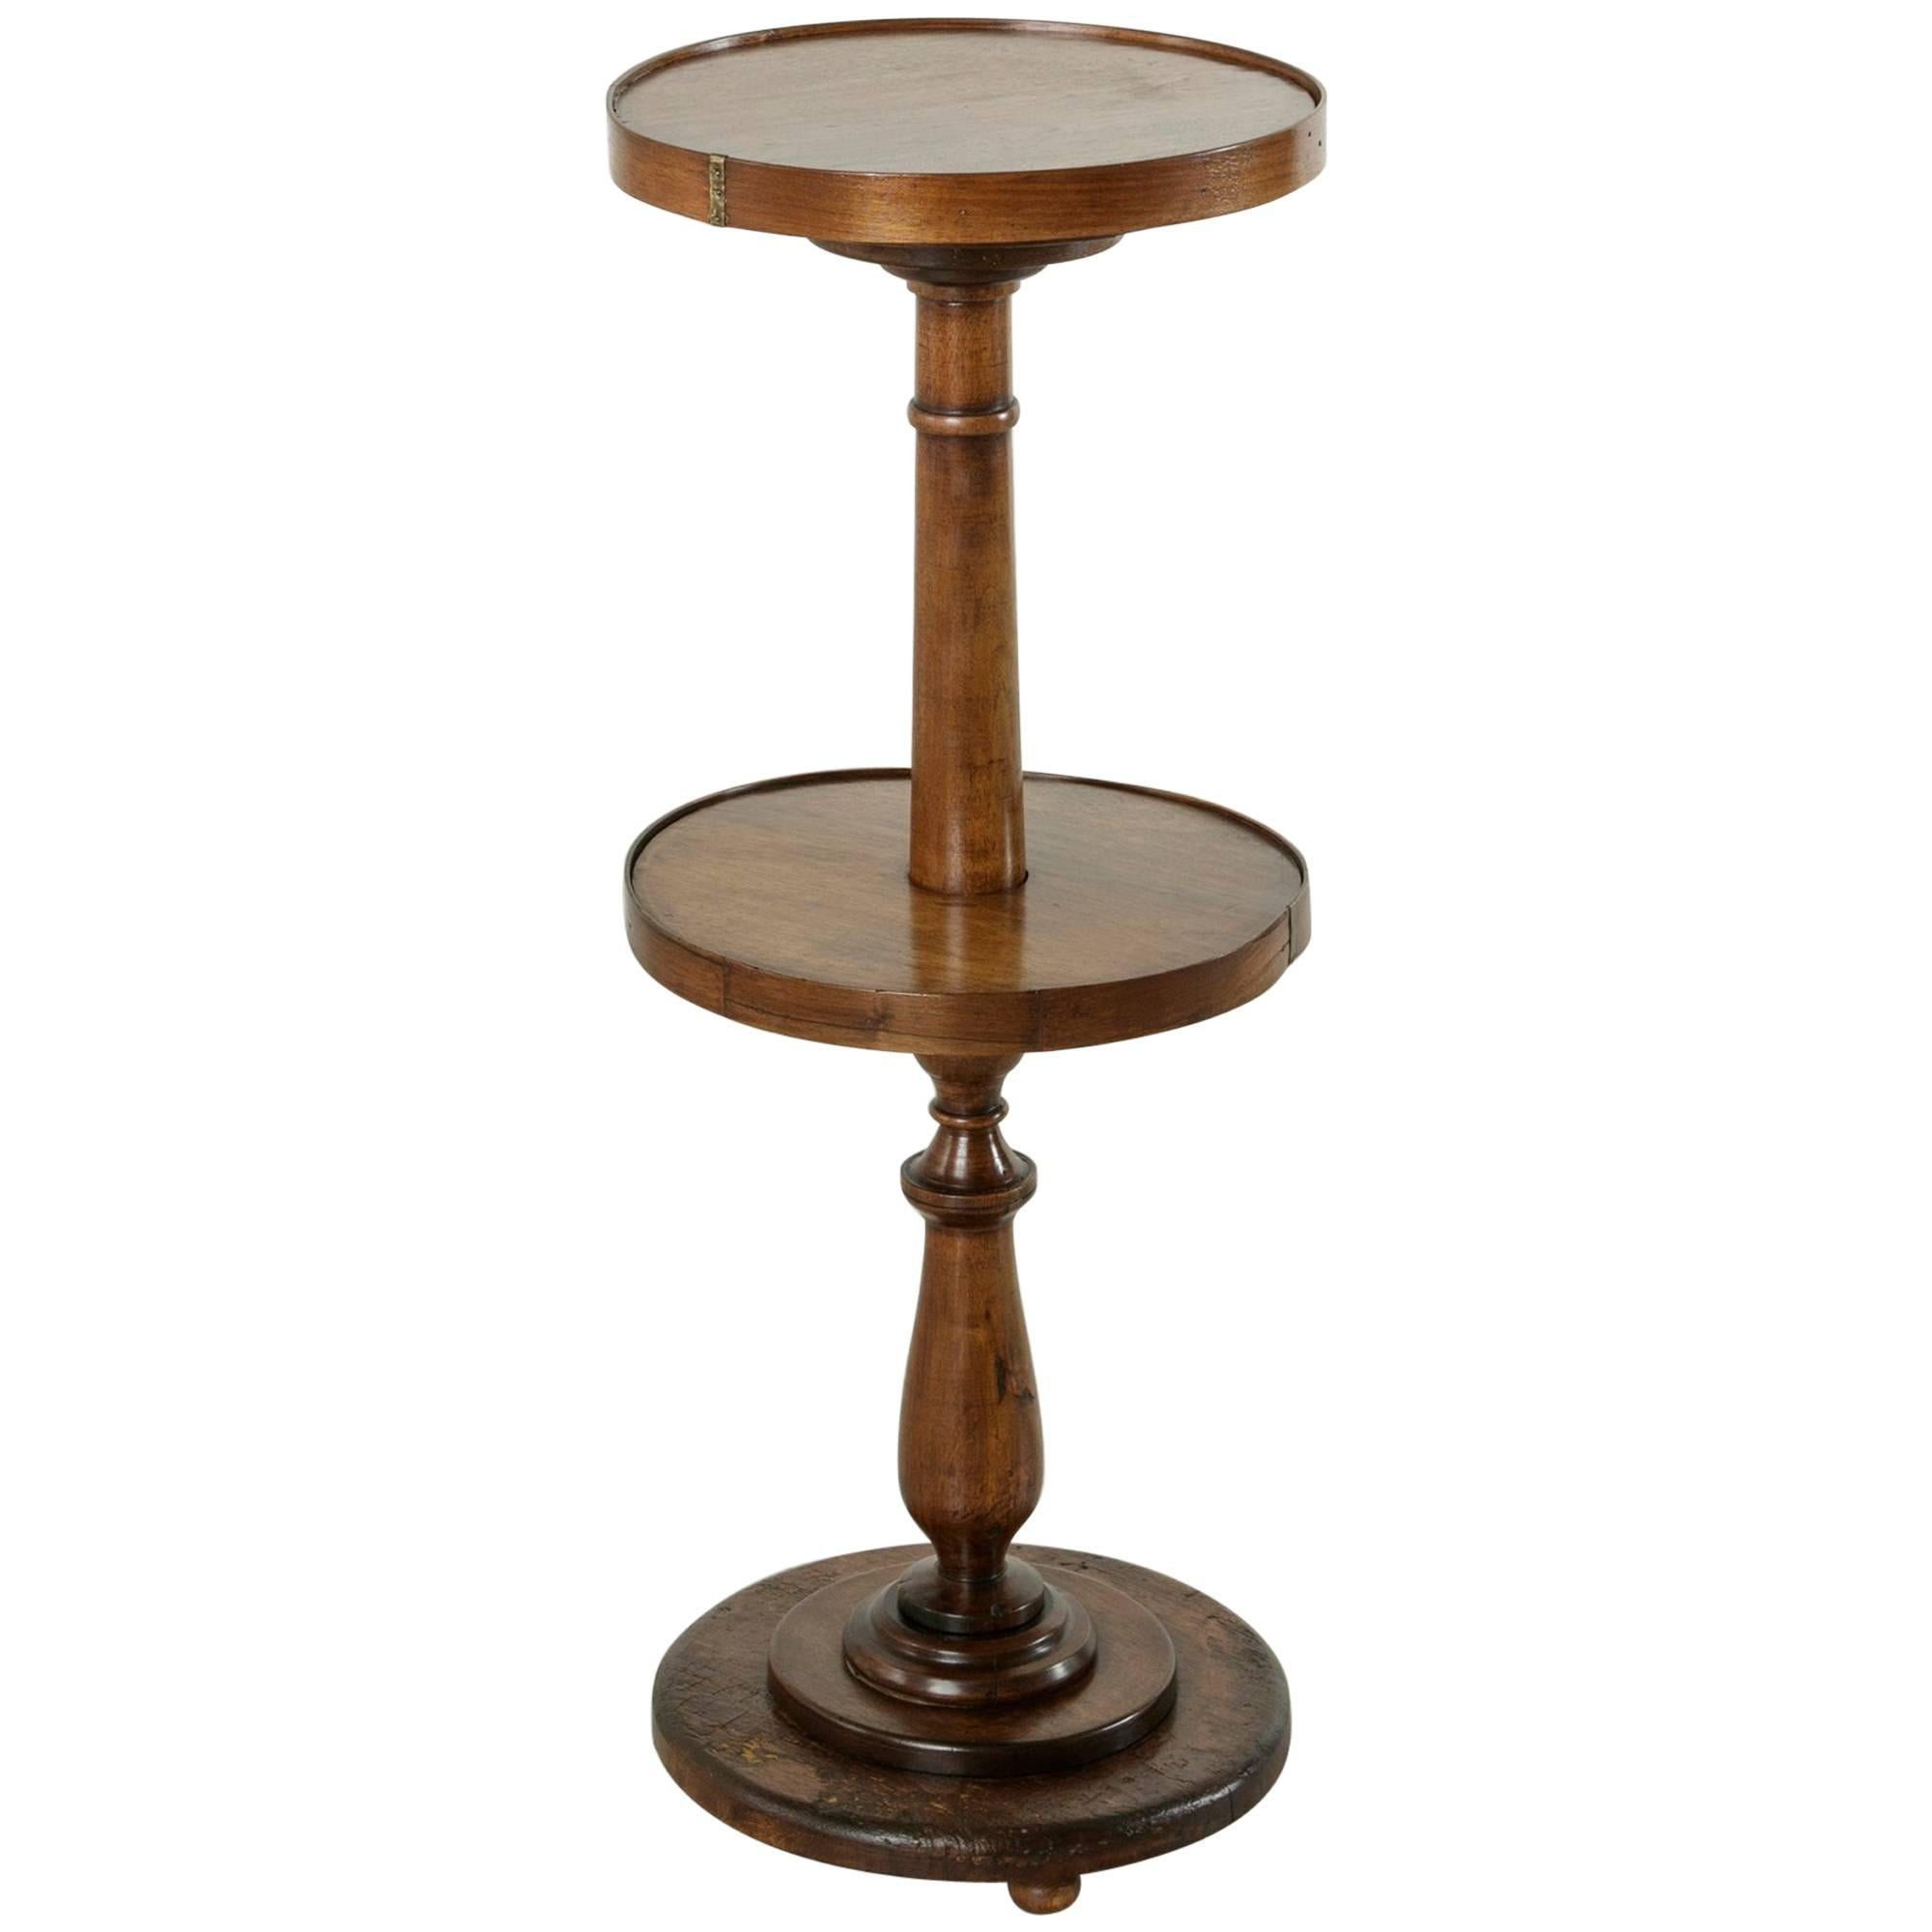 Late 19th Century French Walnut Lace Maker's Table, Pedestal, or Sculpture Stand